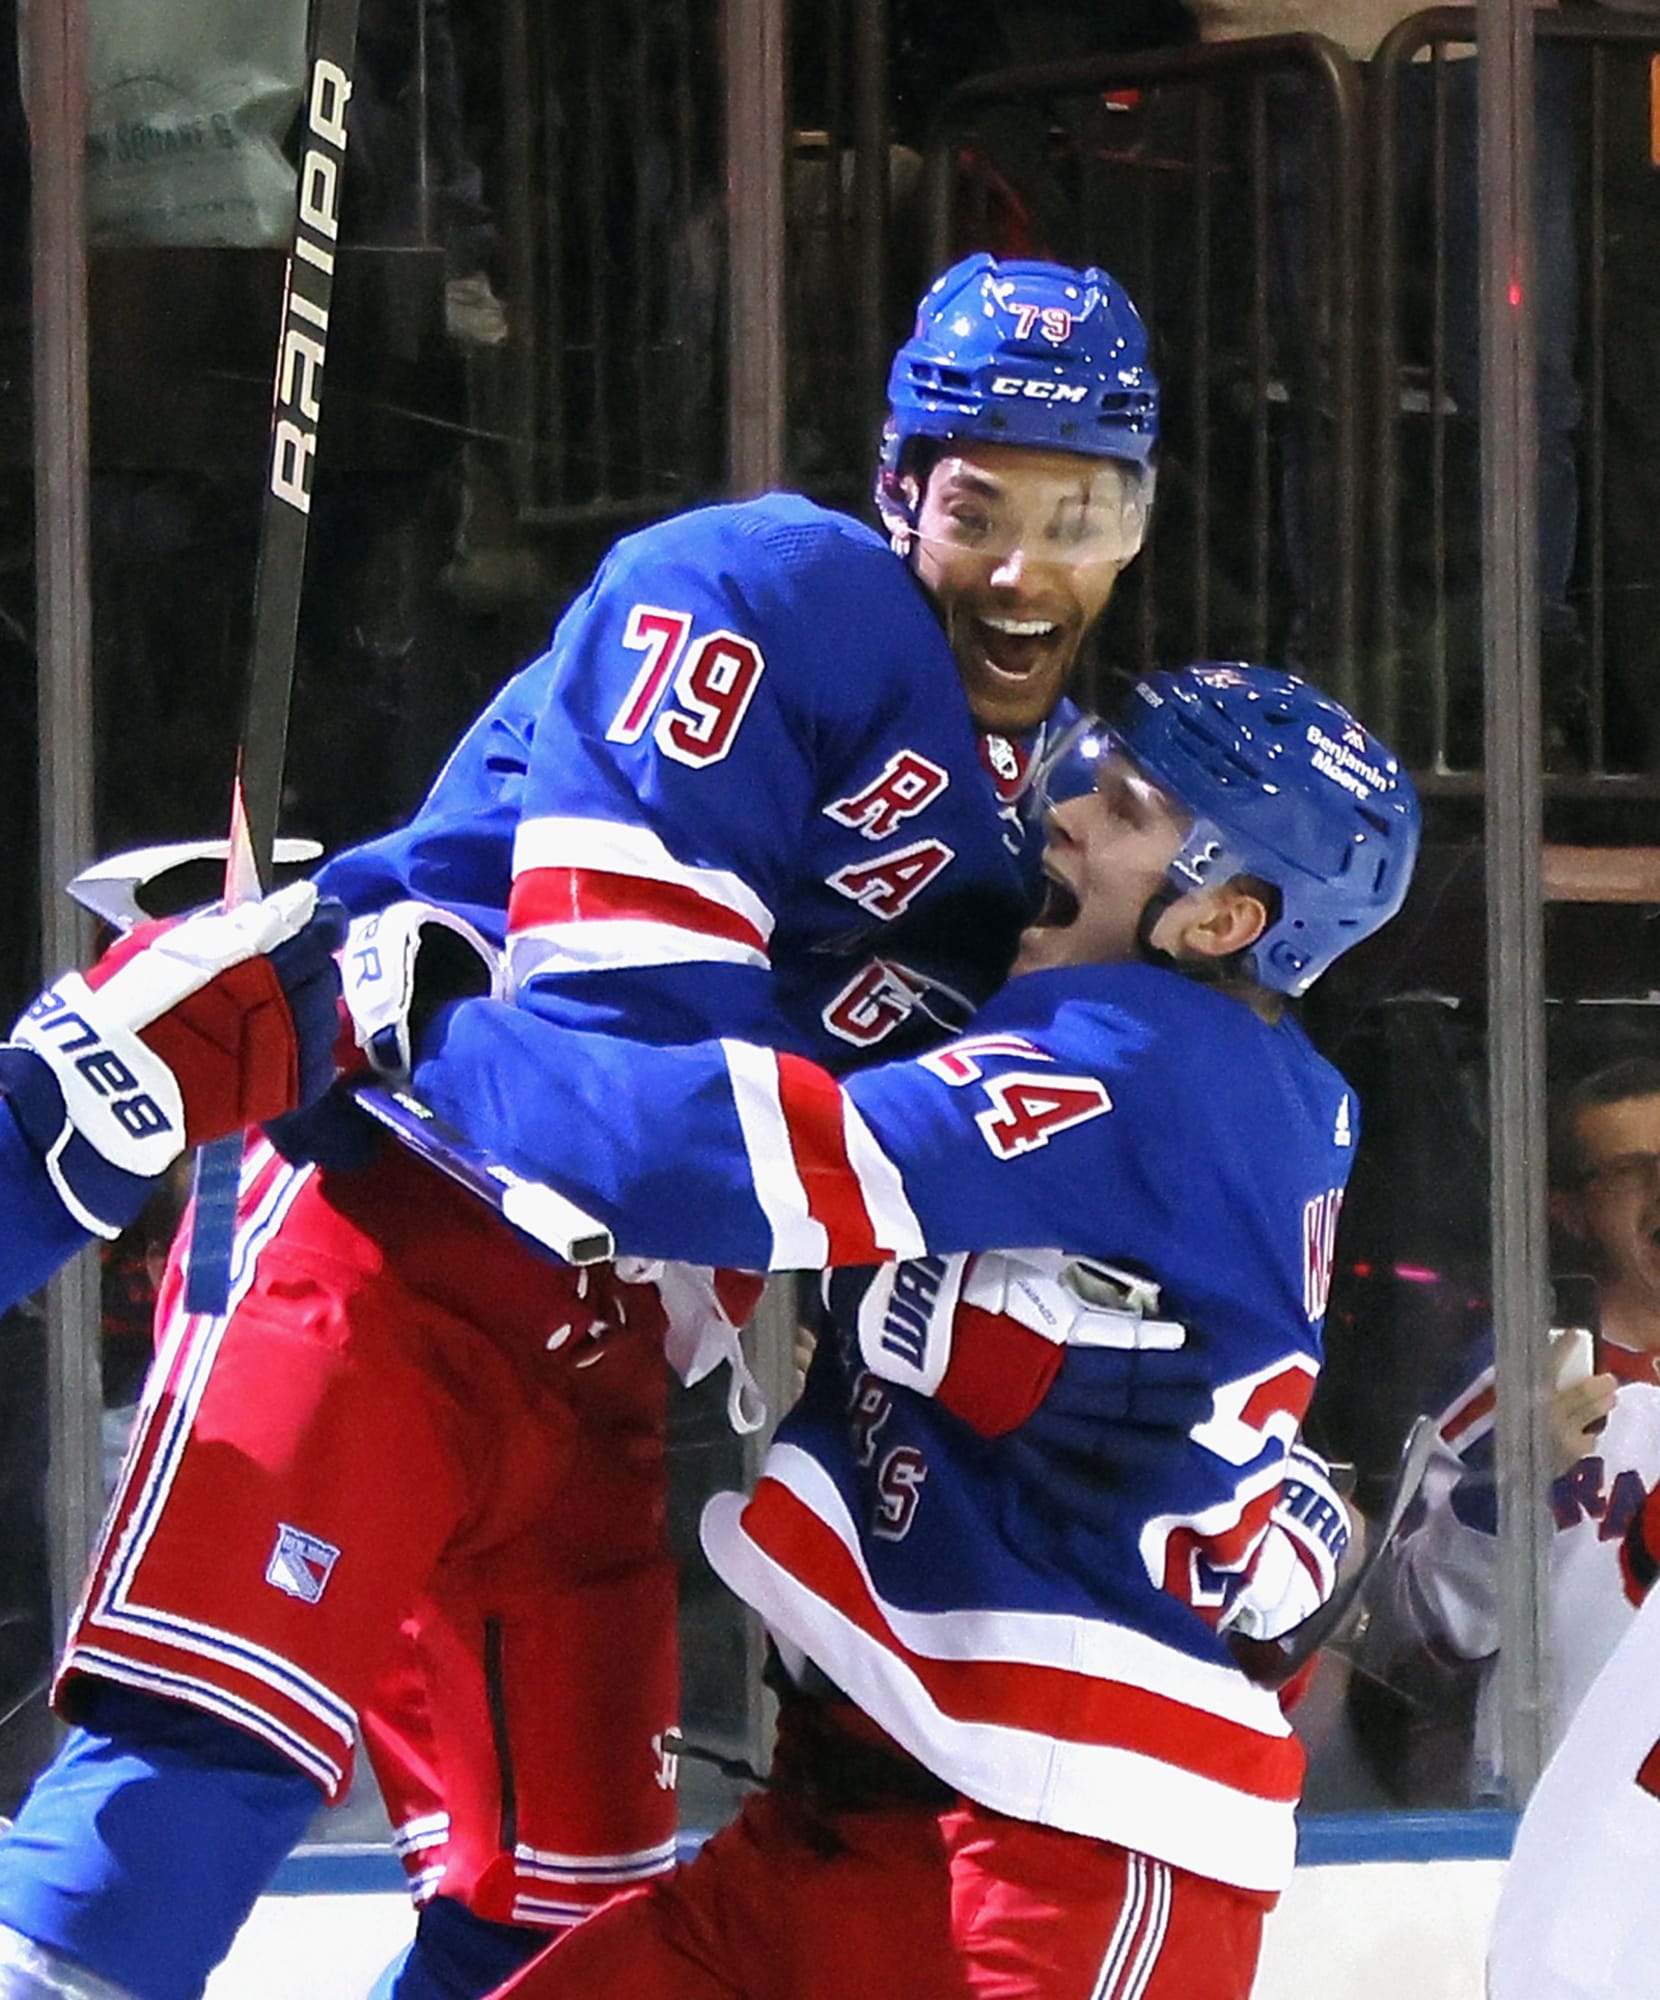 Rangers live up to “No Quit in New York” mantra to force Game 7 vs. Devils